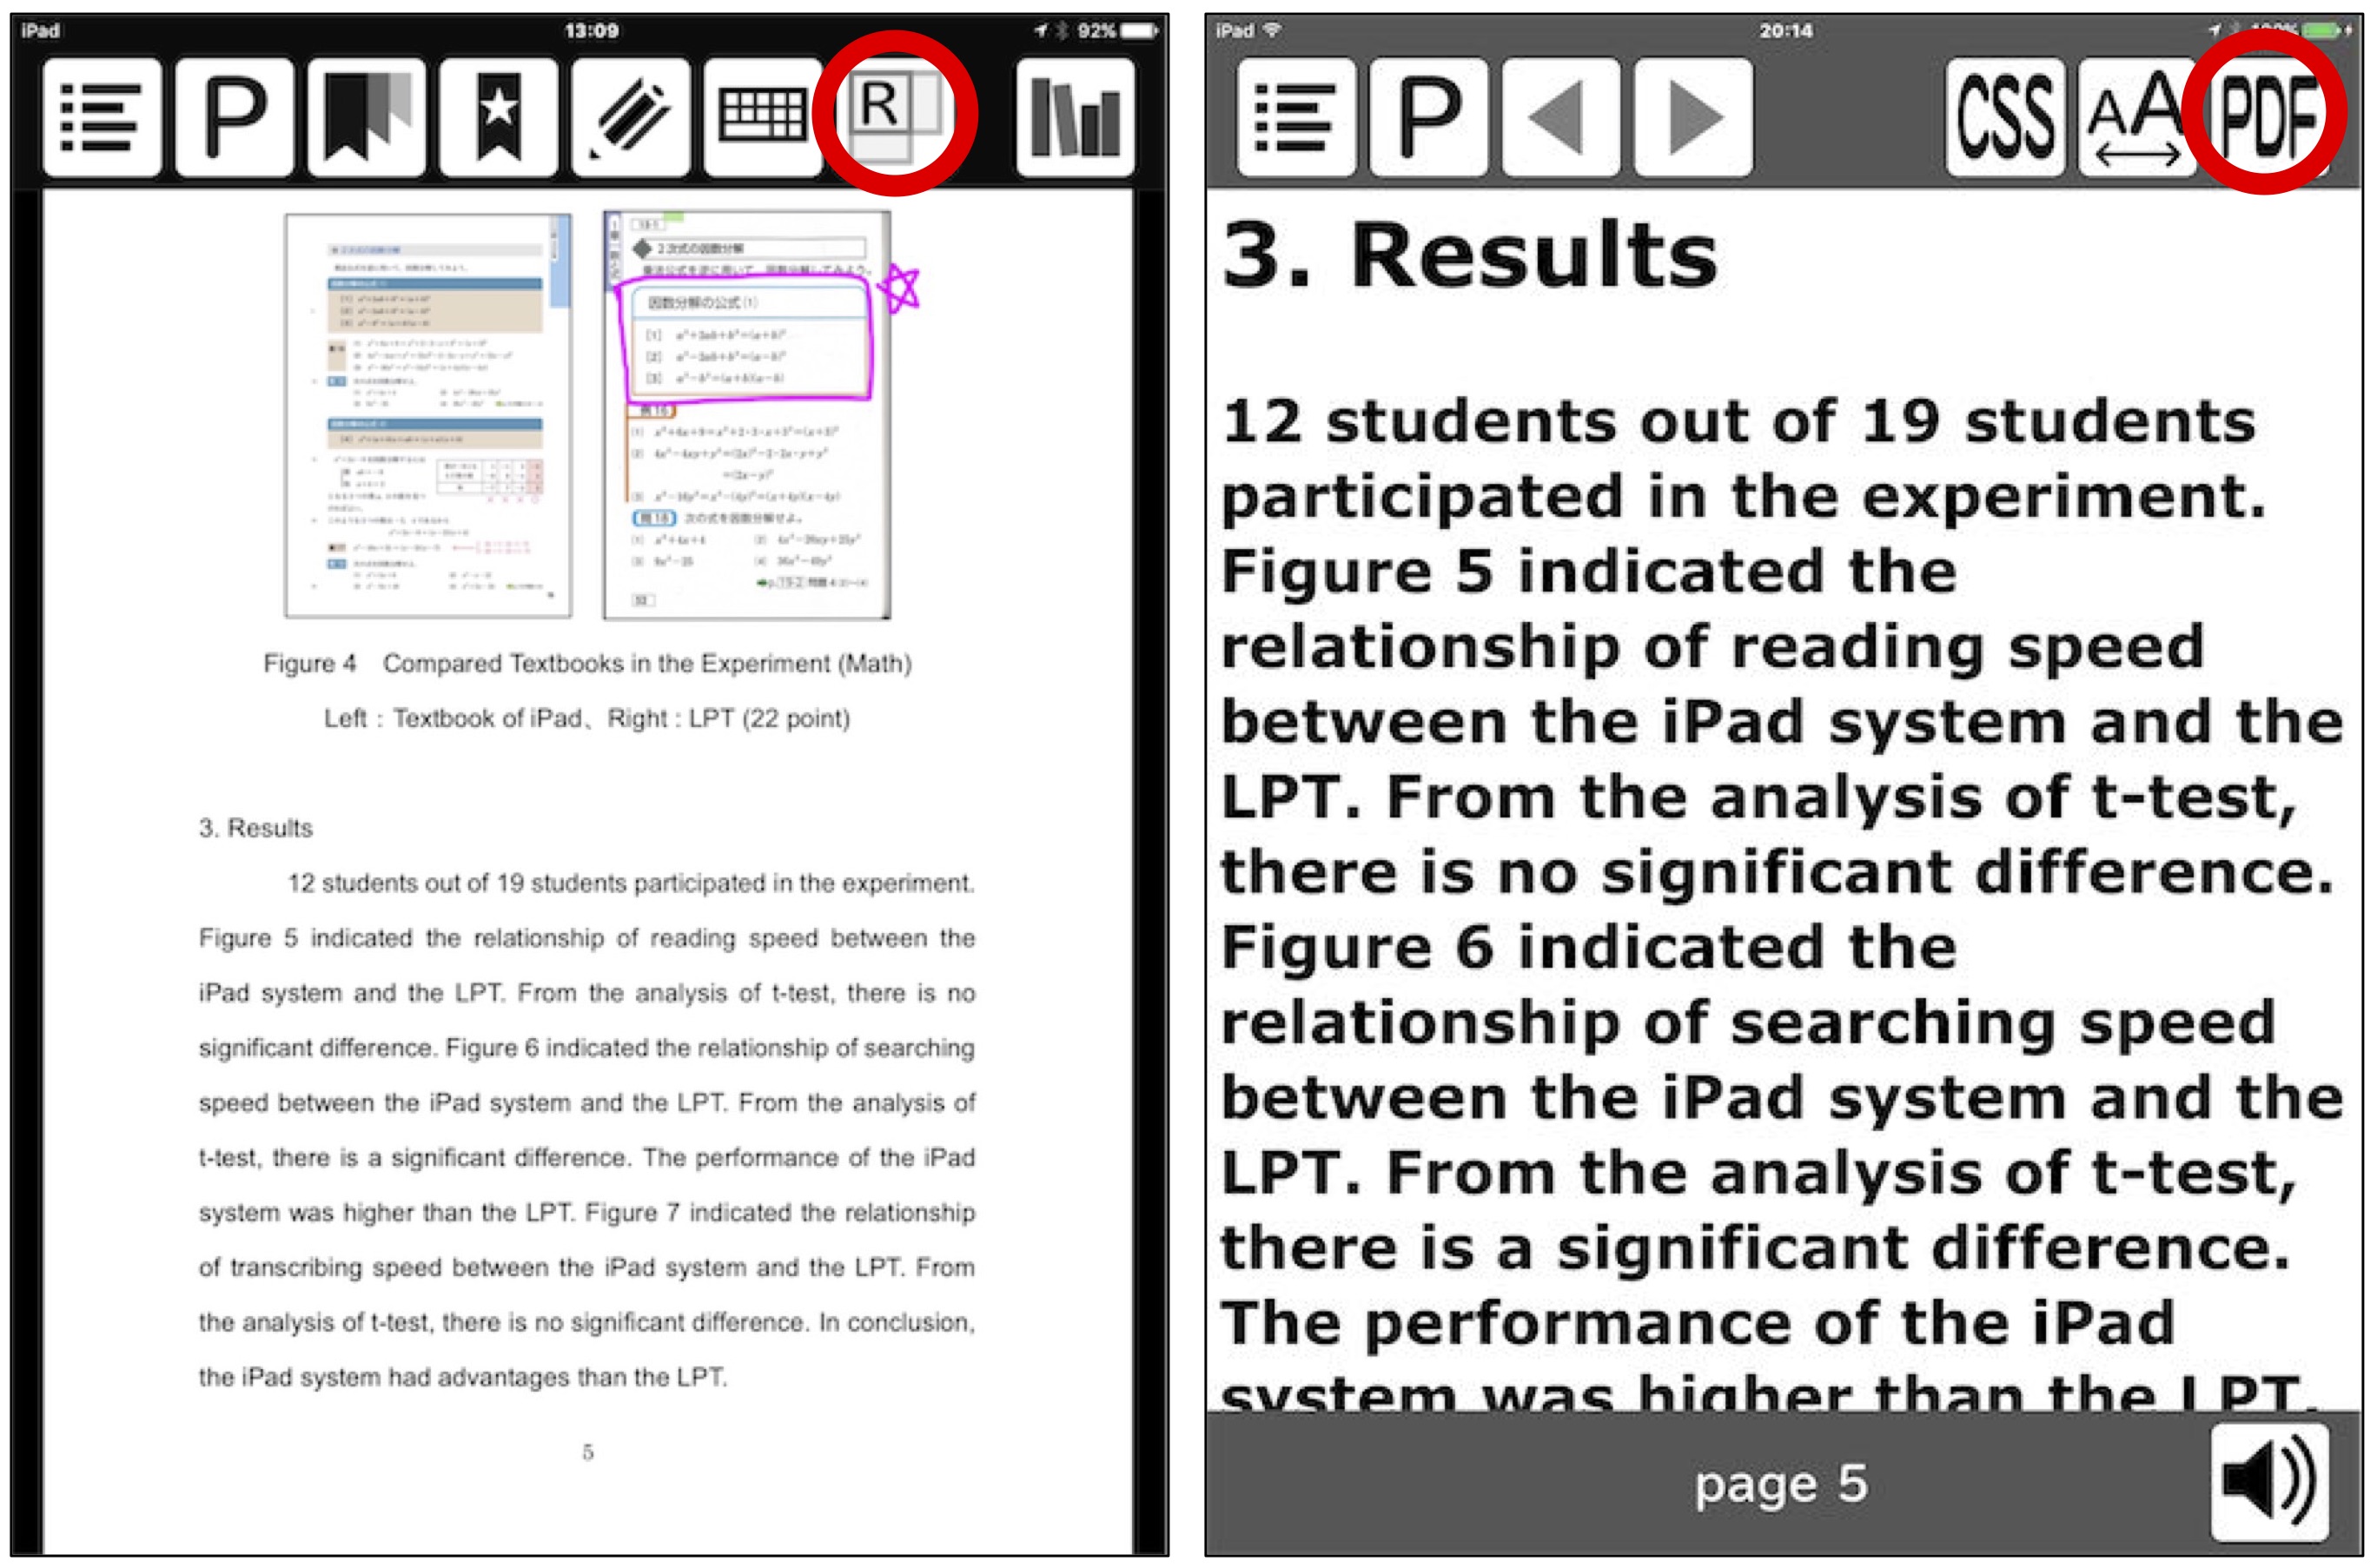 Figure 28  PDF Screen (figure on left) and HTML/Reflow Screen (figure on right)